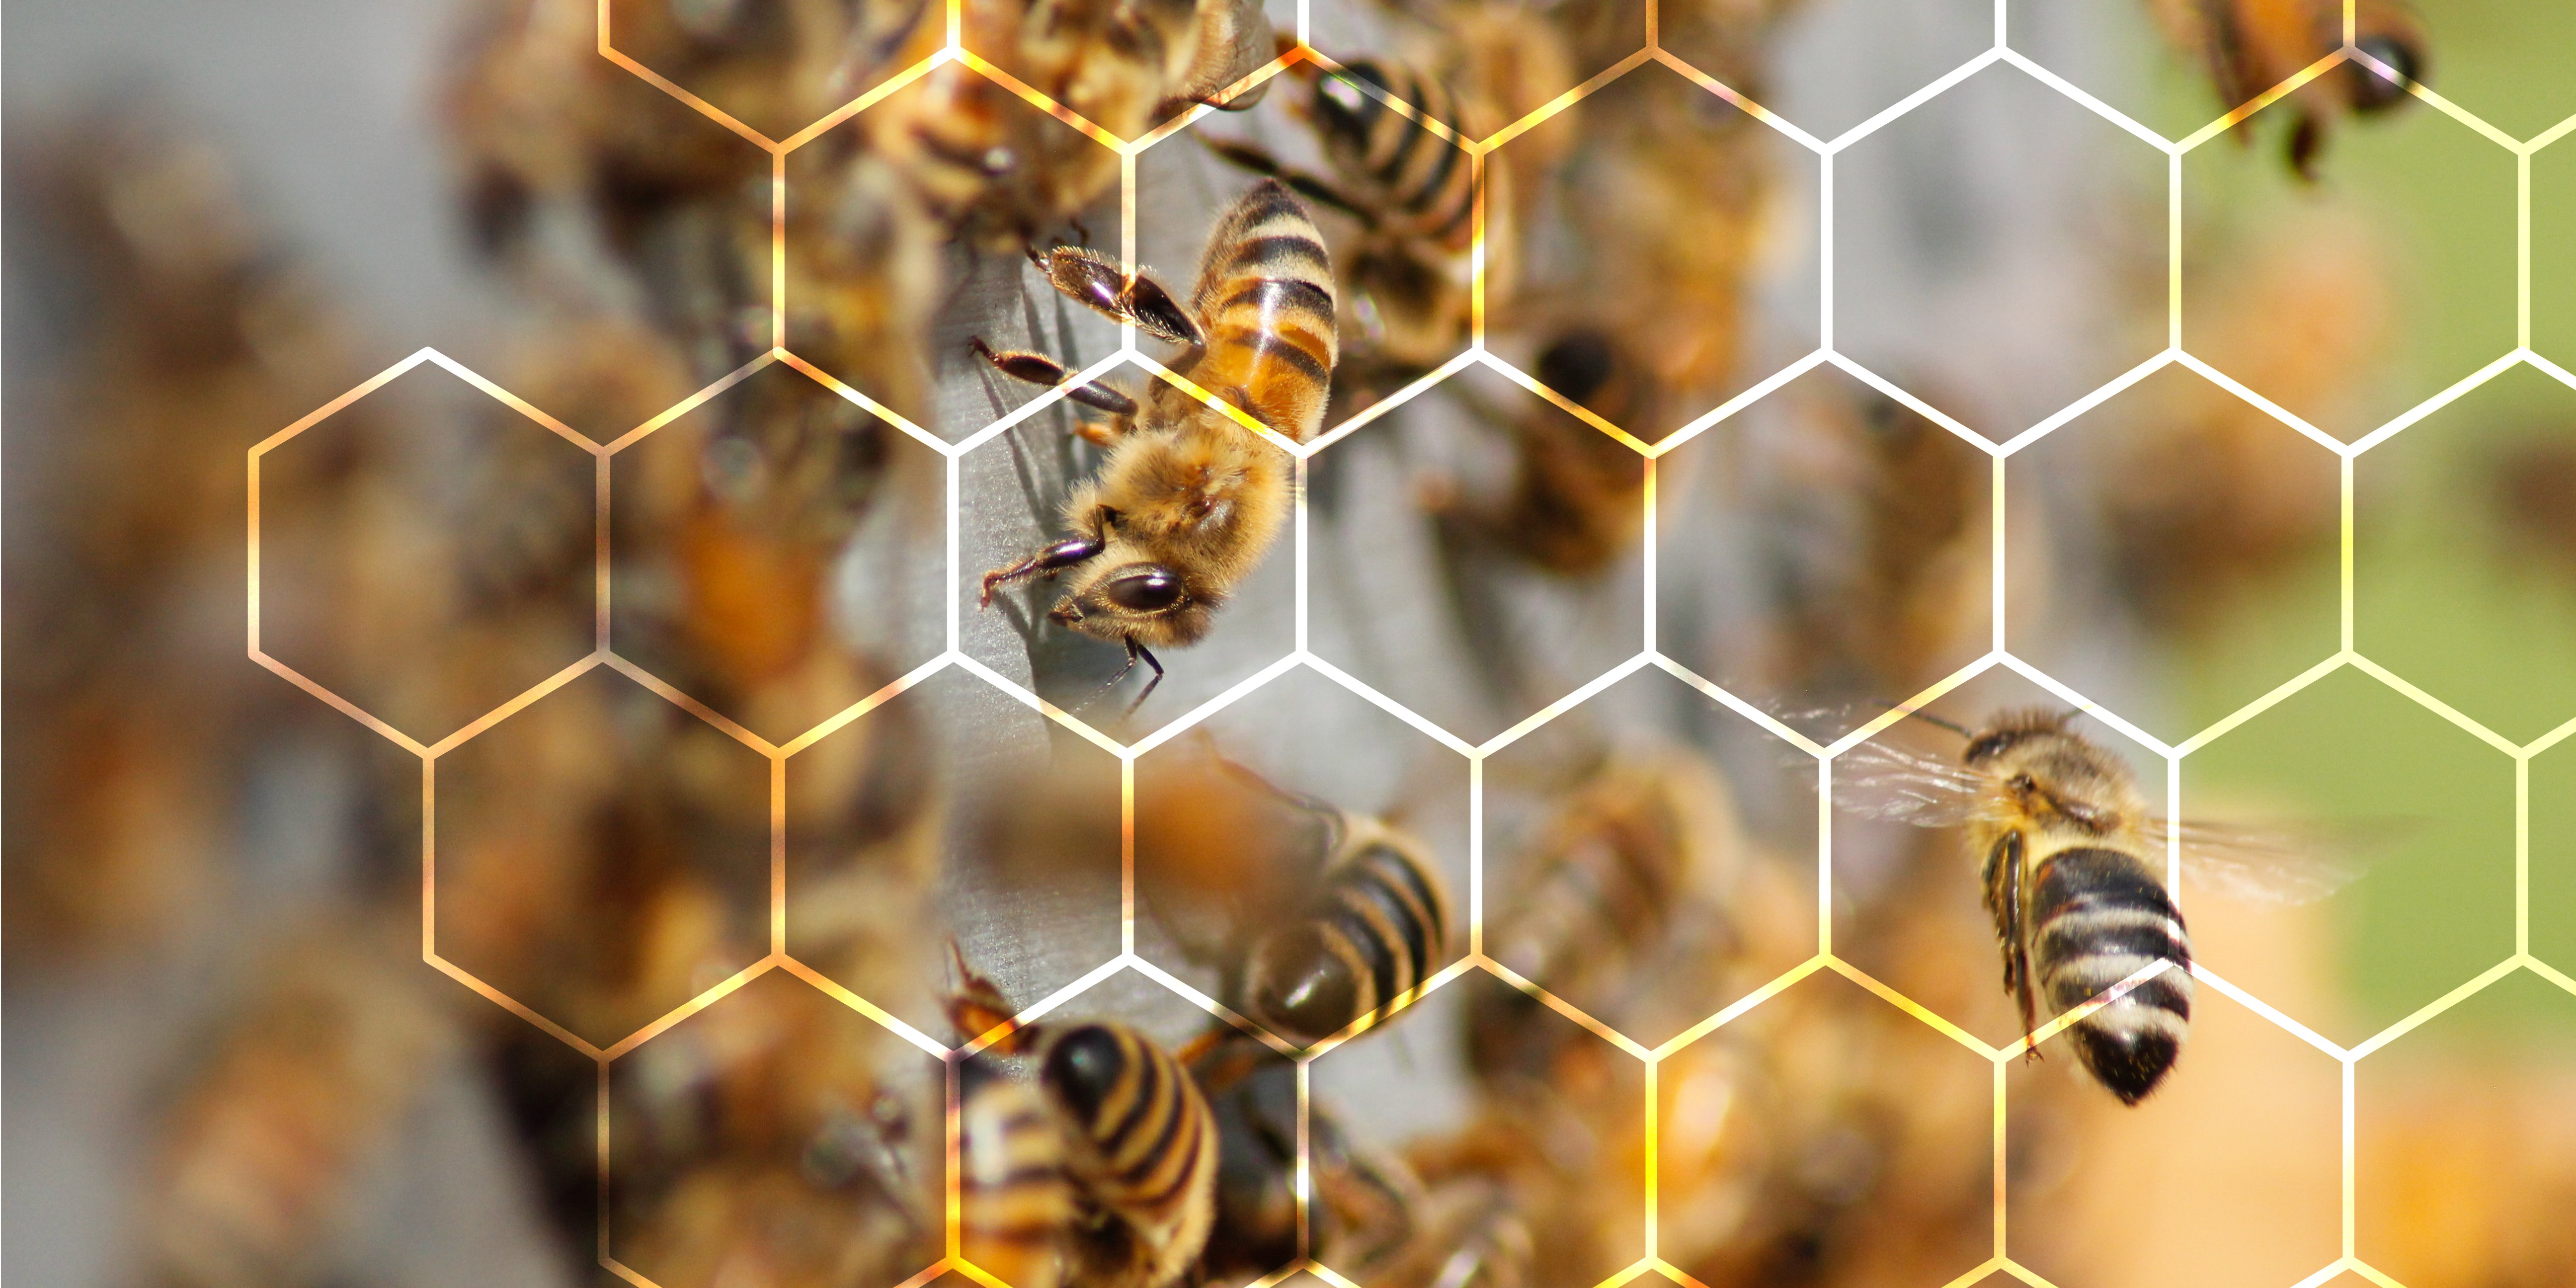 Bees crawling over the honeycomb, with highlighted comb's cell lines